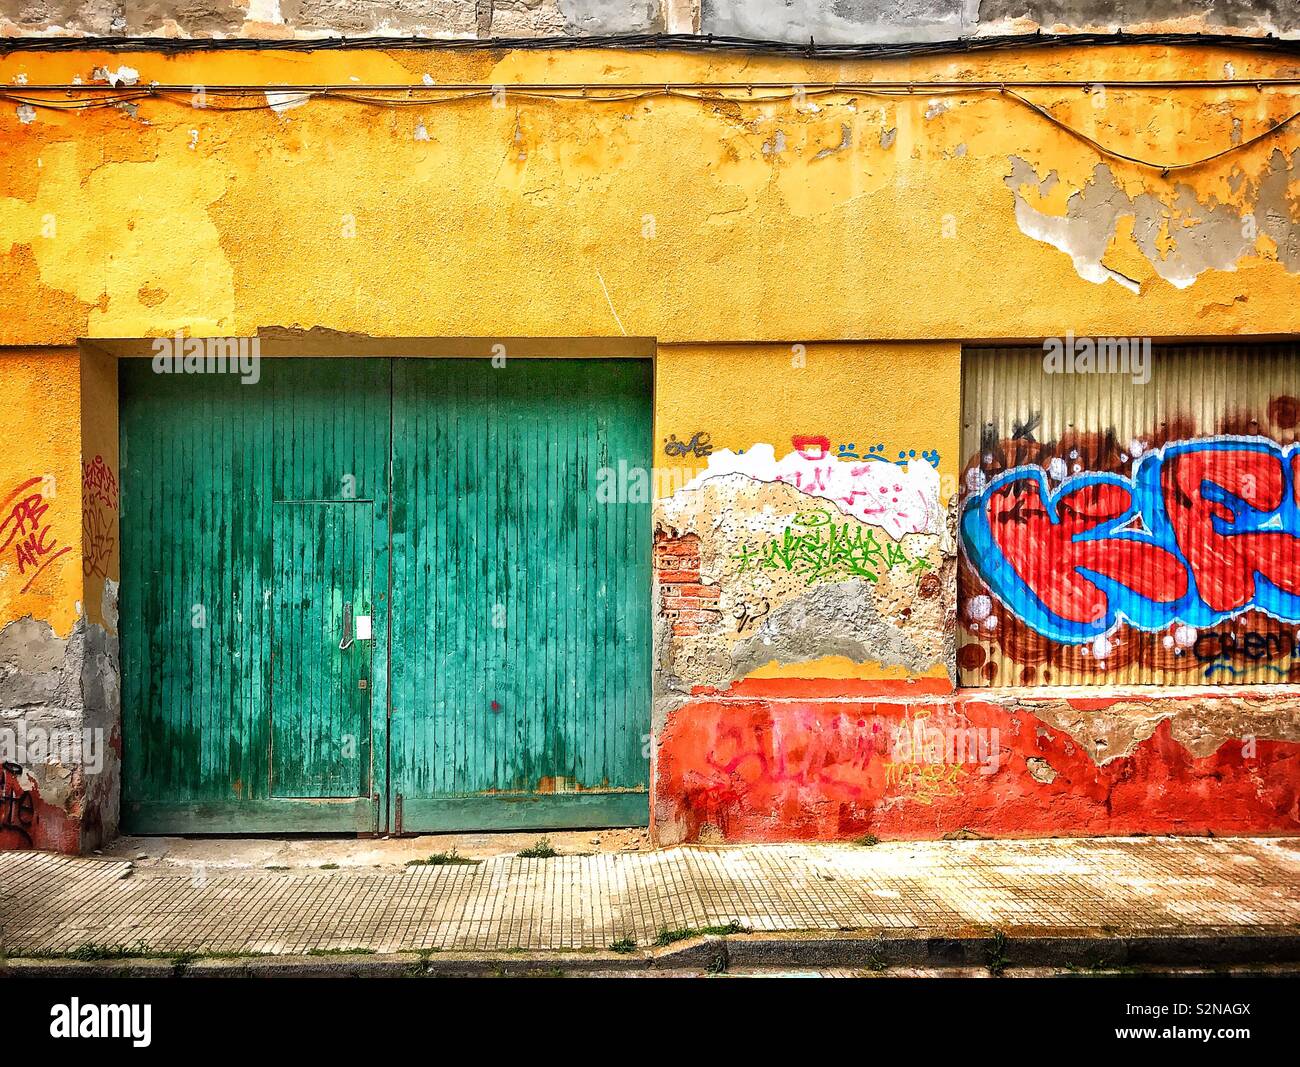 Green entrance doors to a dilapidated building in the Spanish fishing village of Santoña, the walls of which are daubed with graffiti. Stock Photo